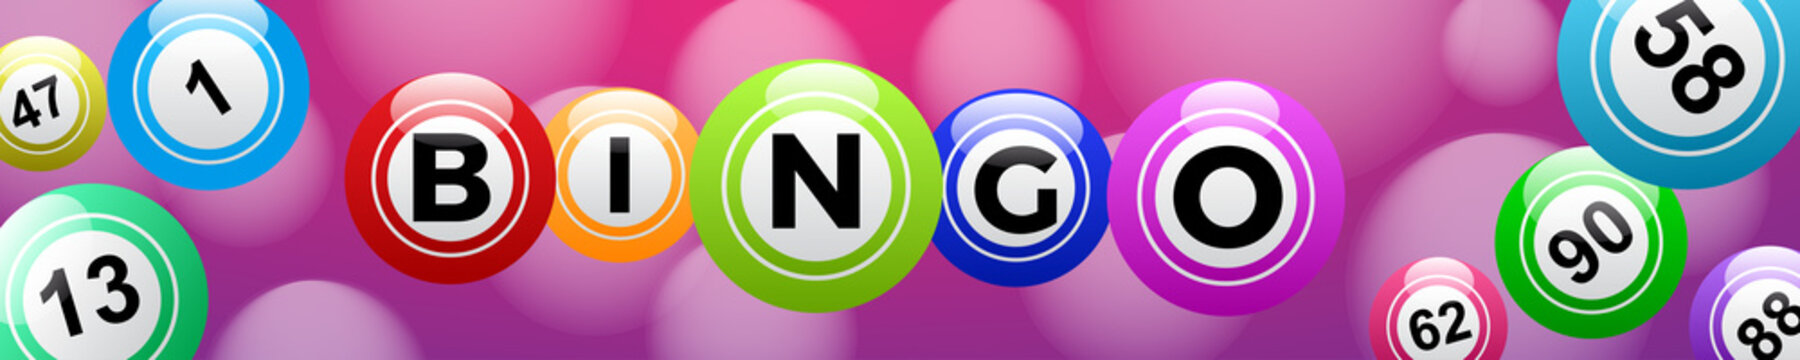 Bingo lottery, header background vector design, lucky balls and numbers of lotto